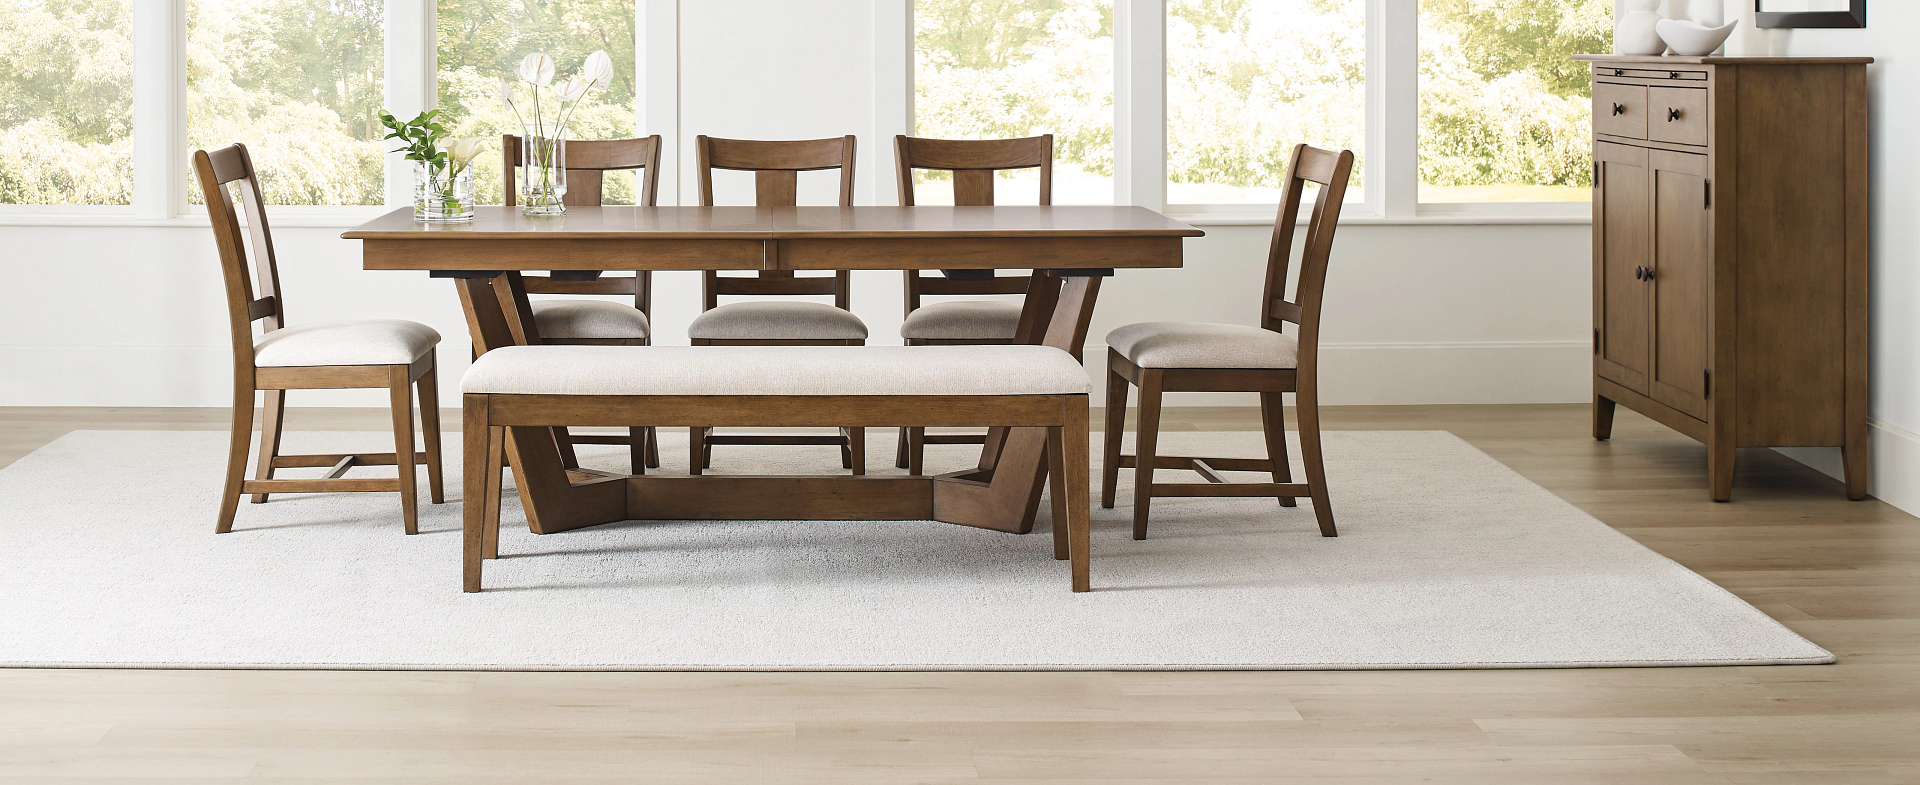 Casual solid wood dining table in latte finish